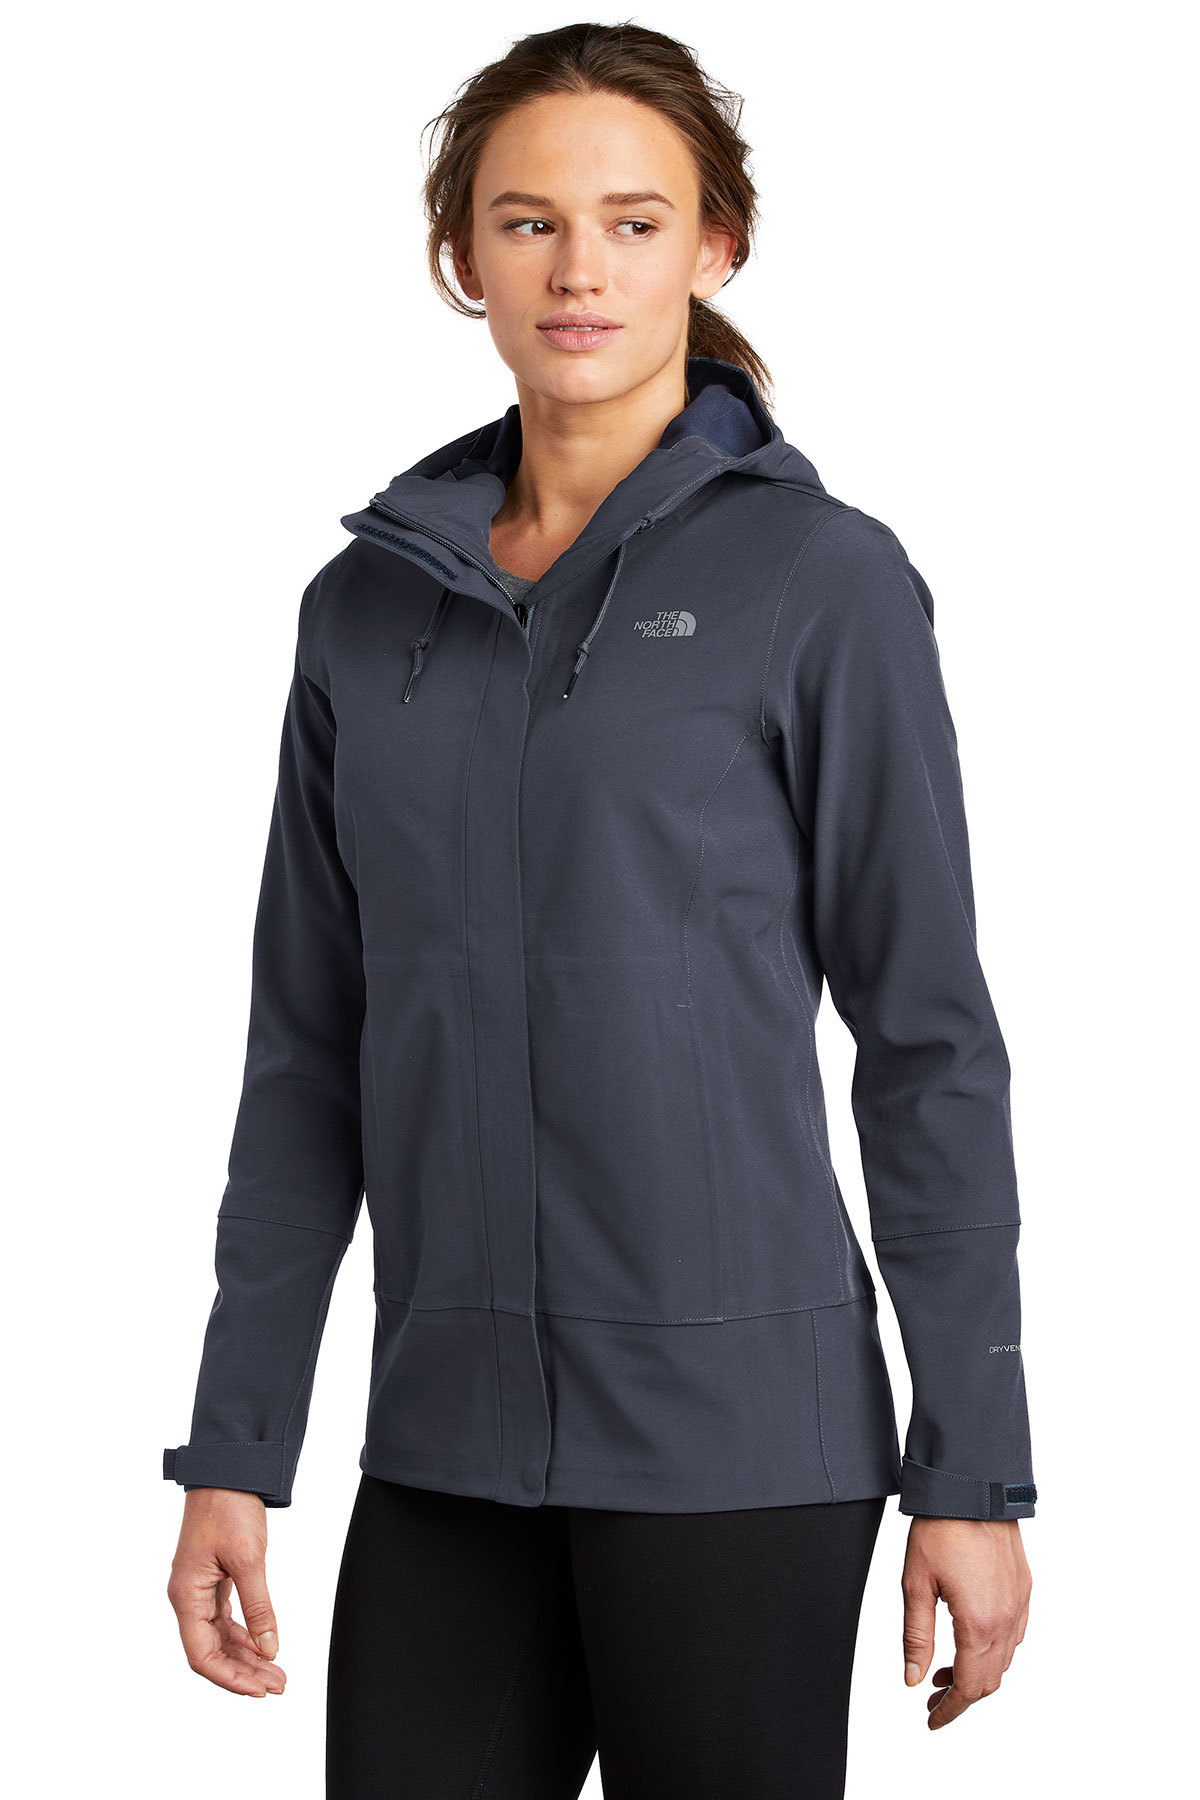 The North Face Ladies Apex DryVent Jacket | Product | Company Casuals